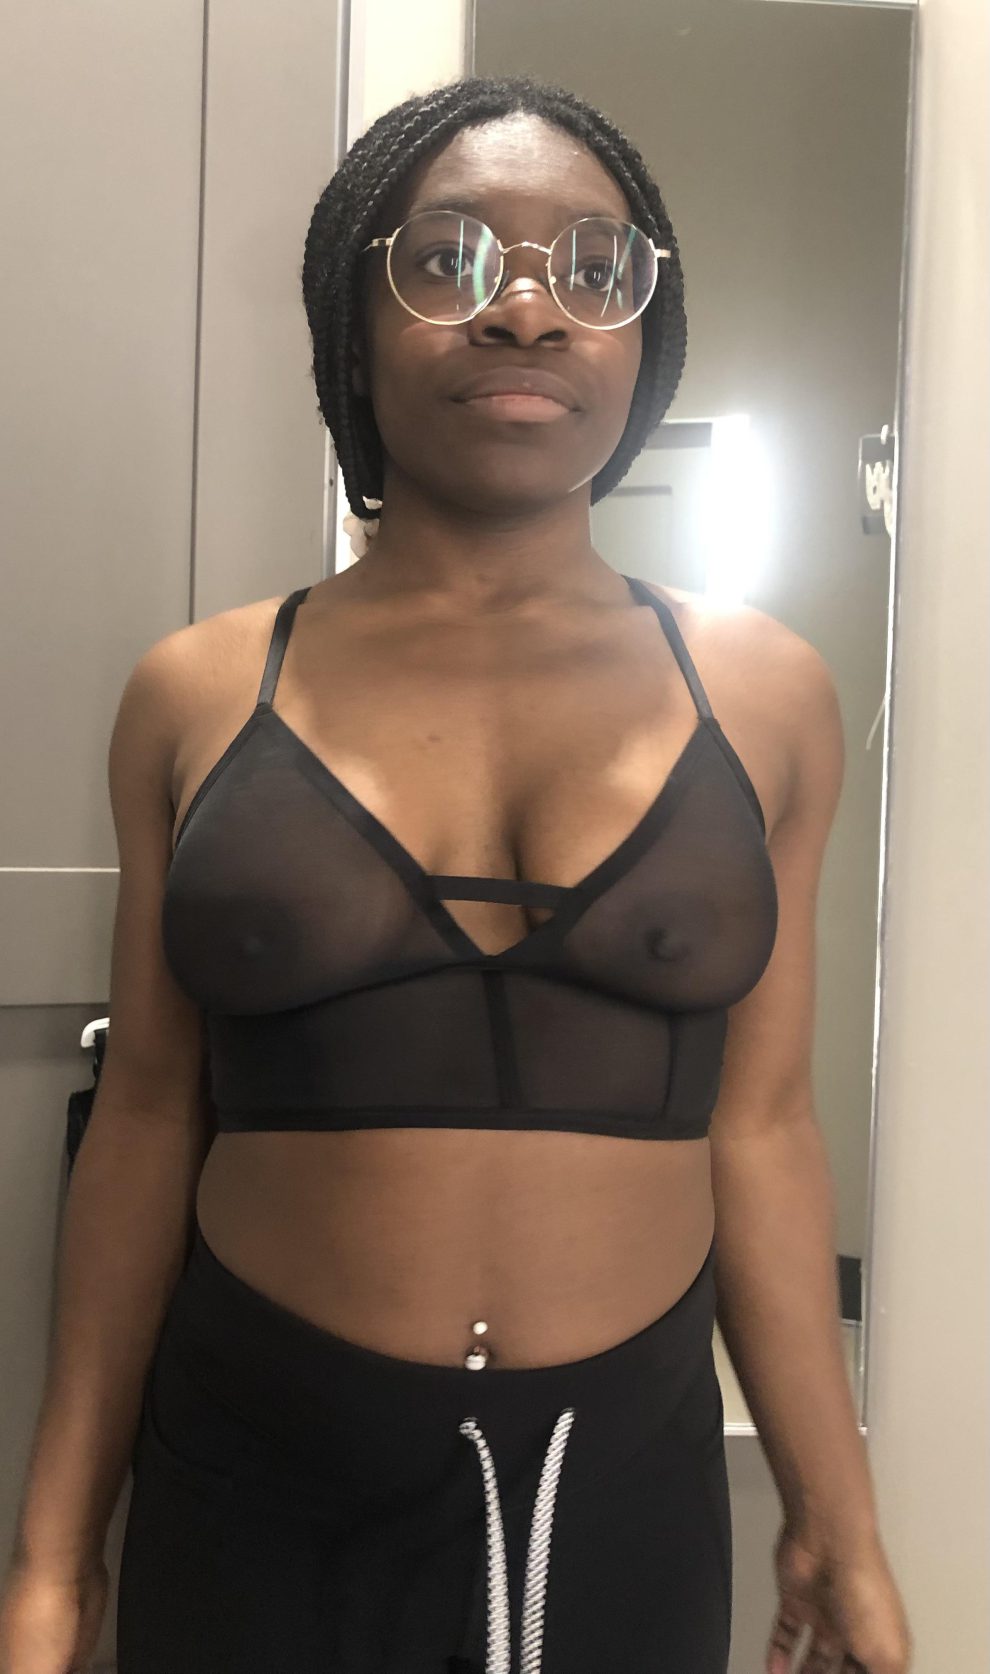 Want to fuck in this changing room?